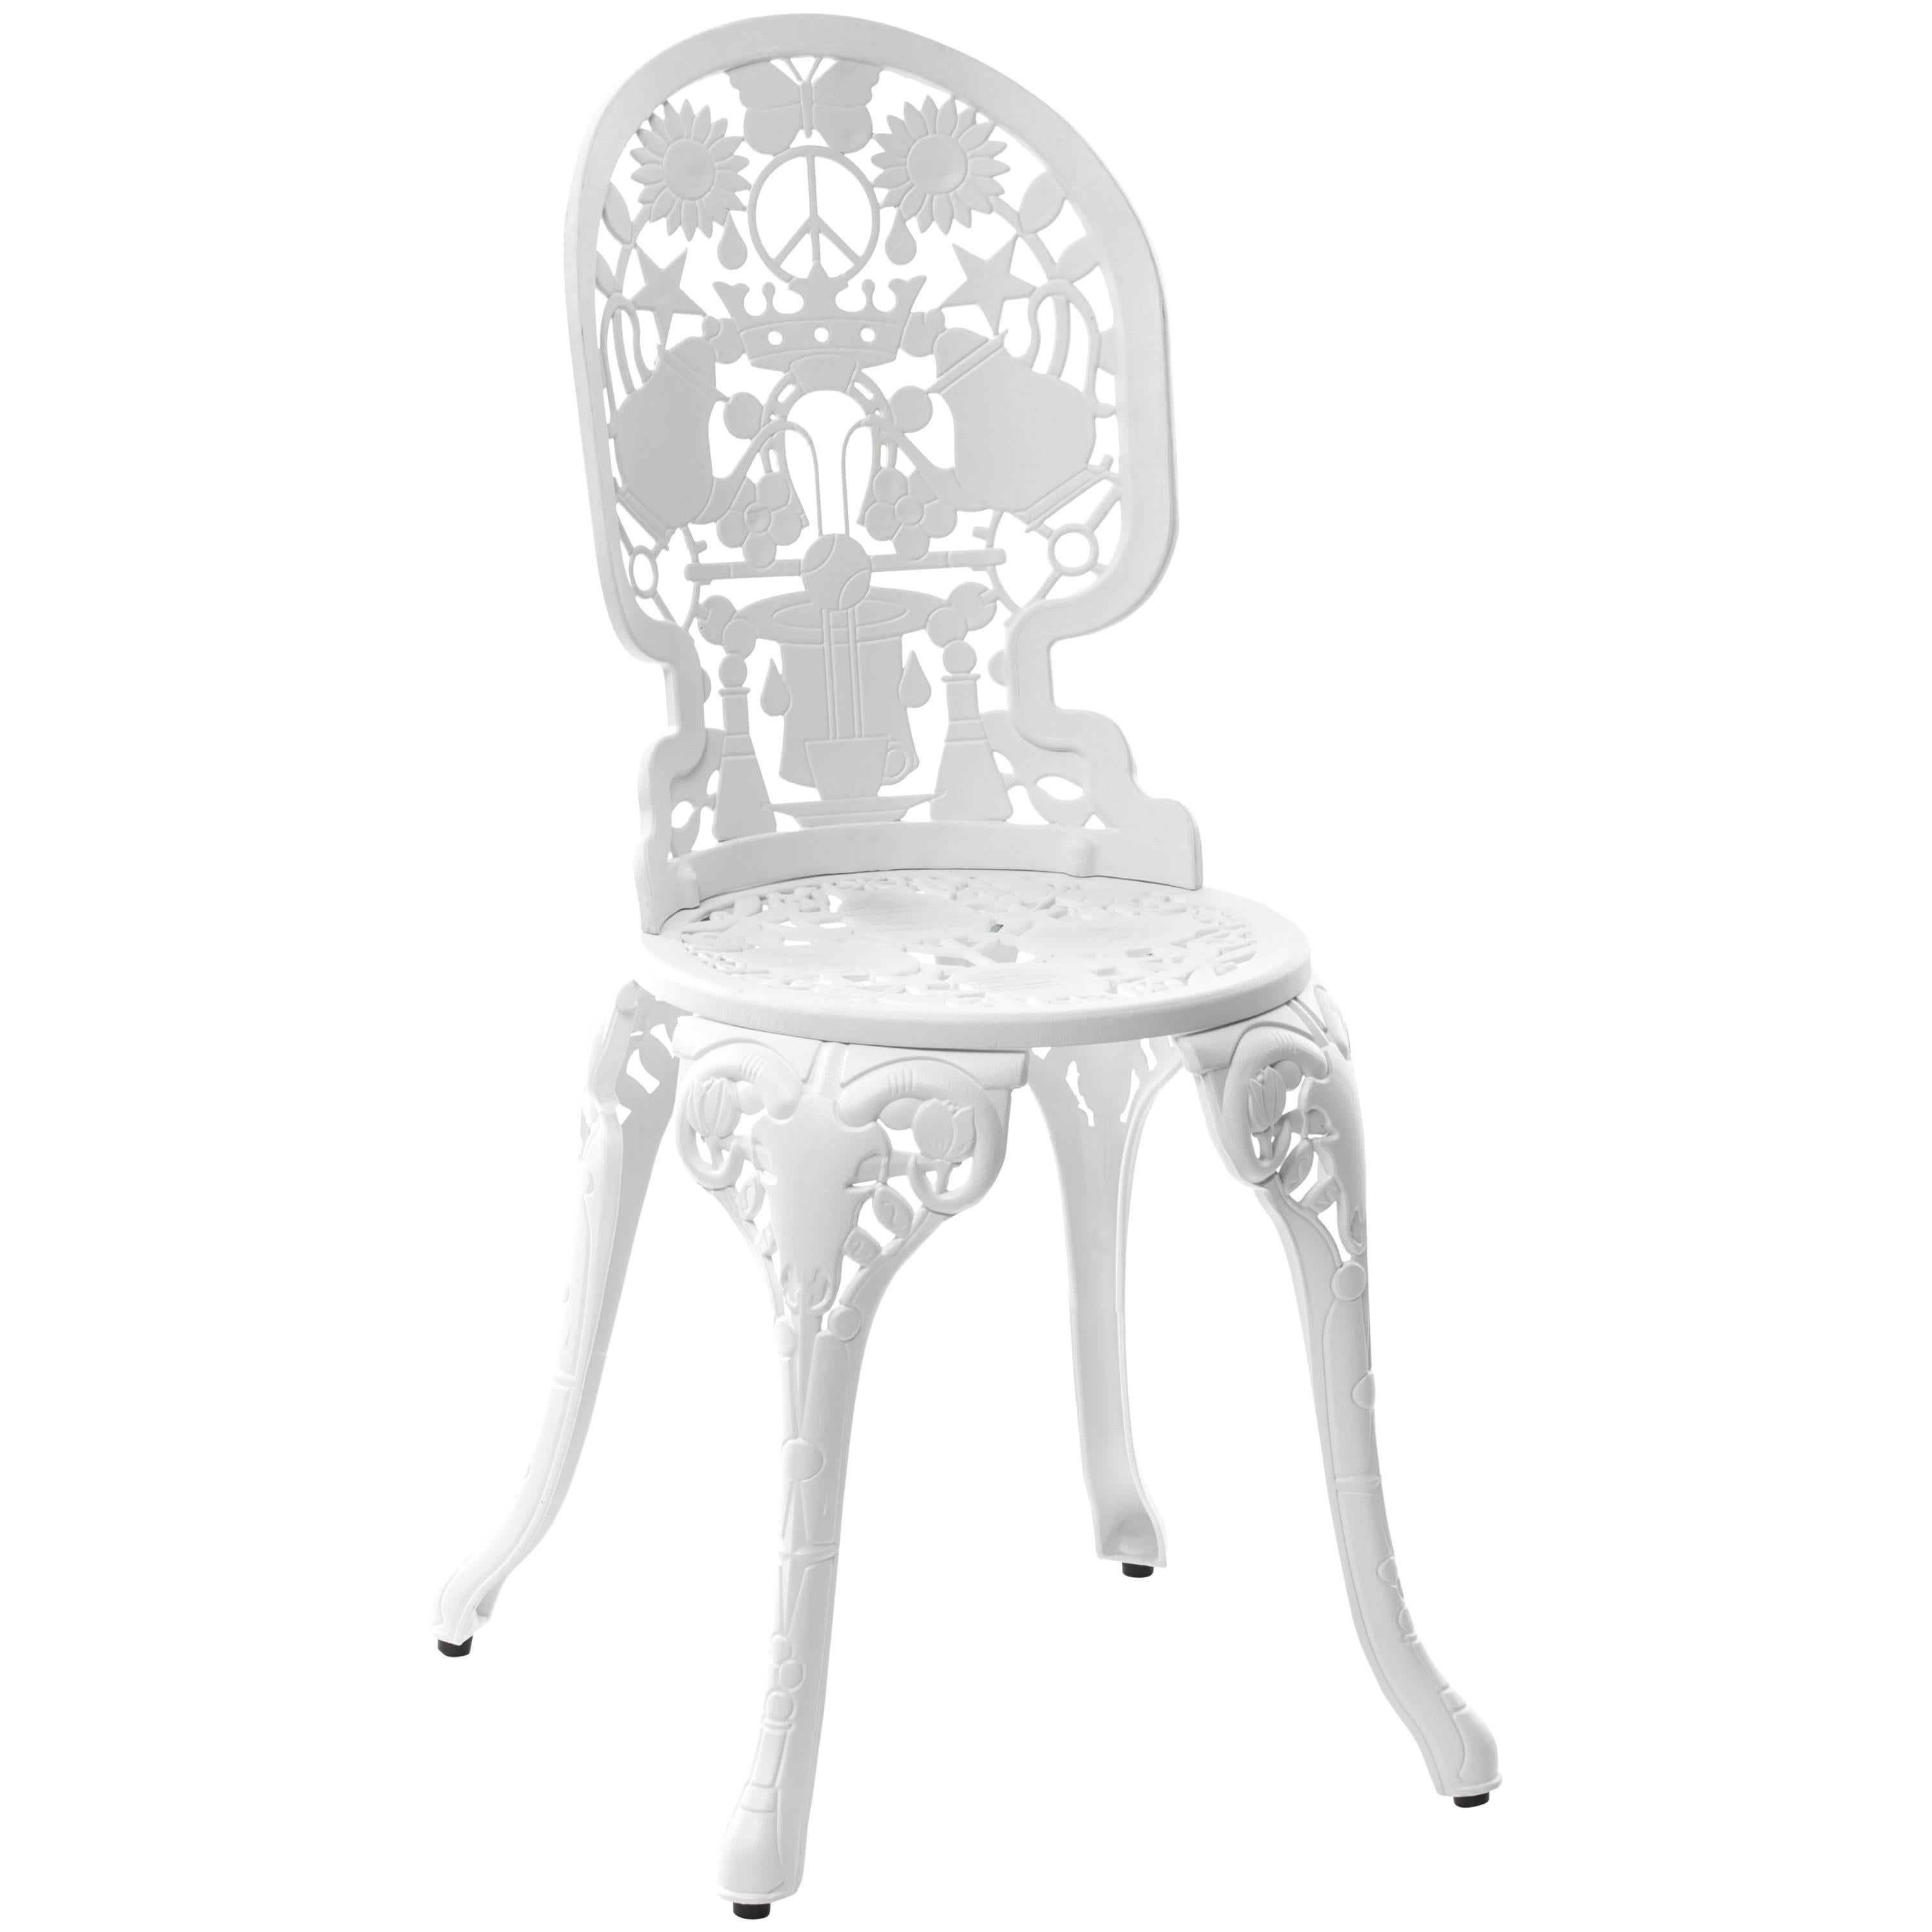 Aluminum Chair "Industry Garden Furniture" by Seletti, White For Sale